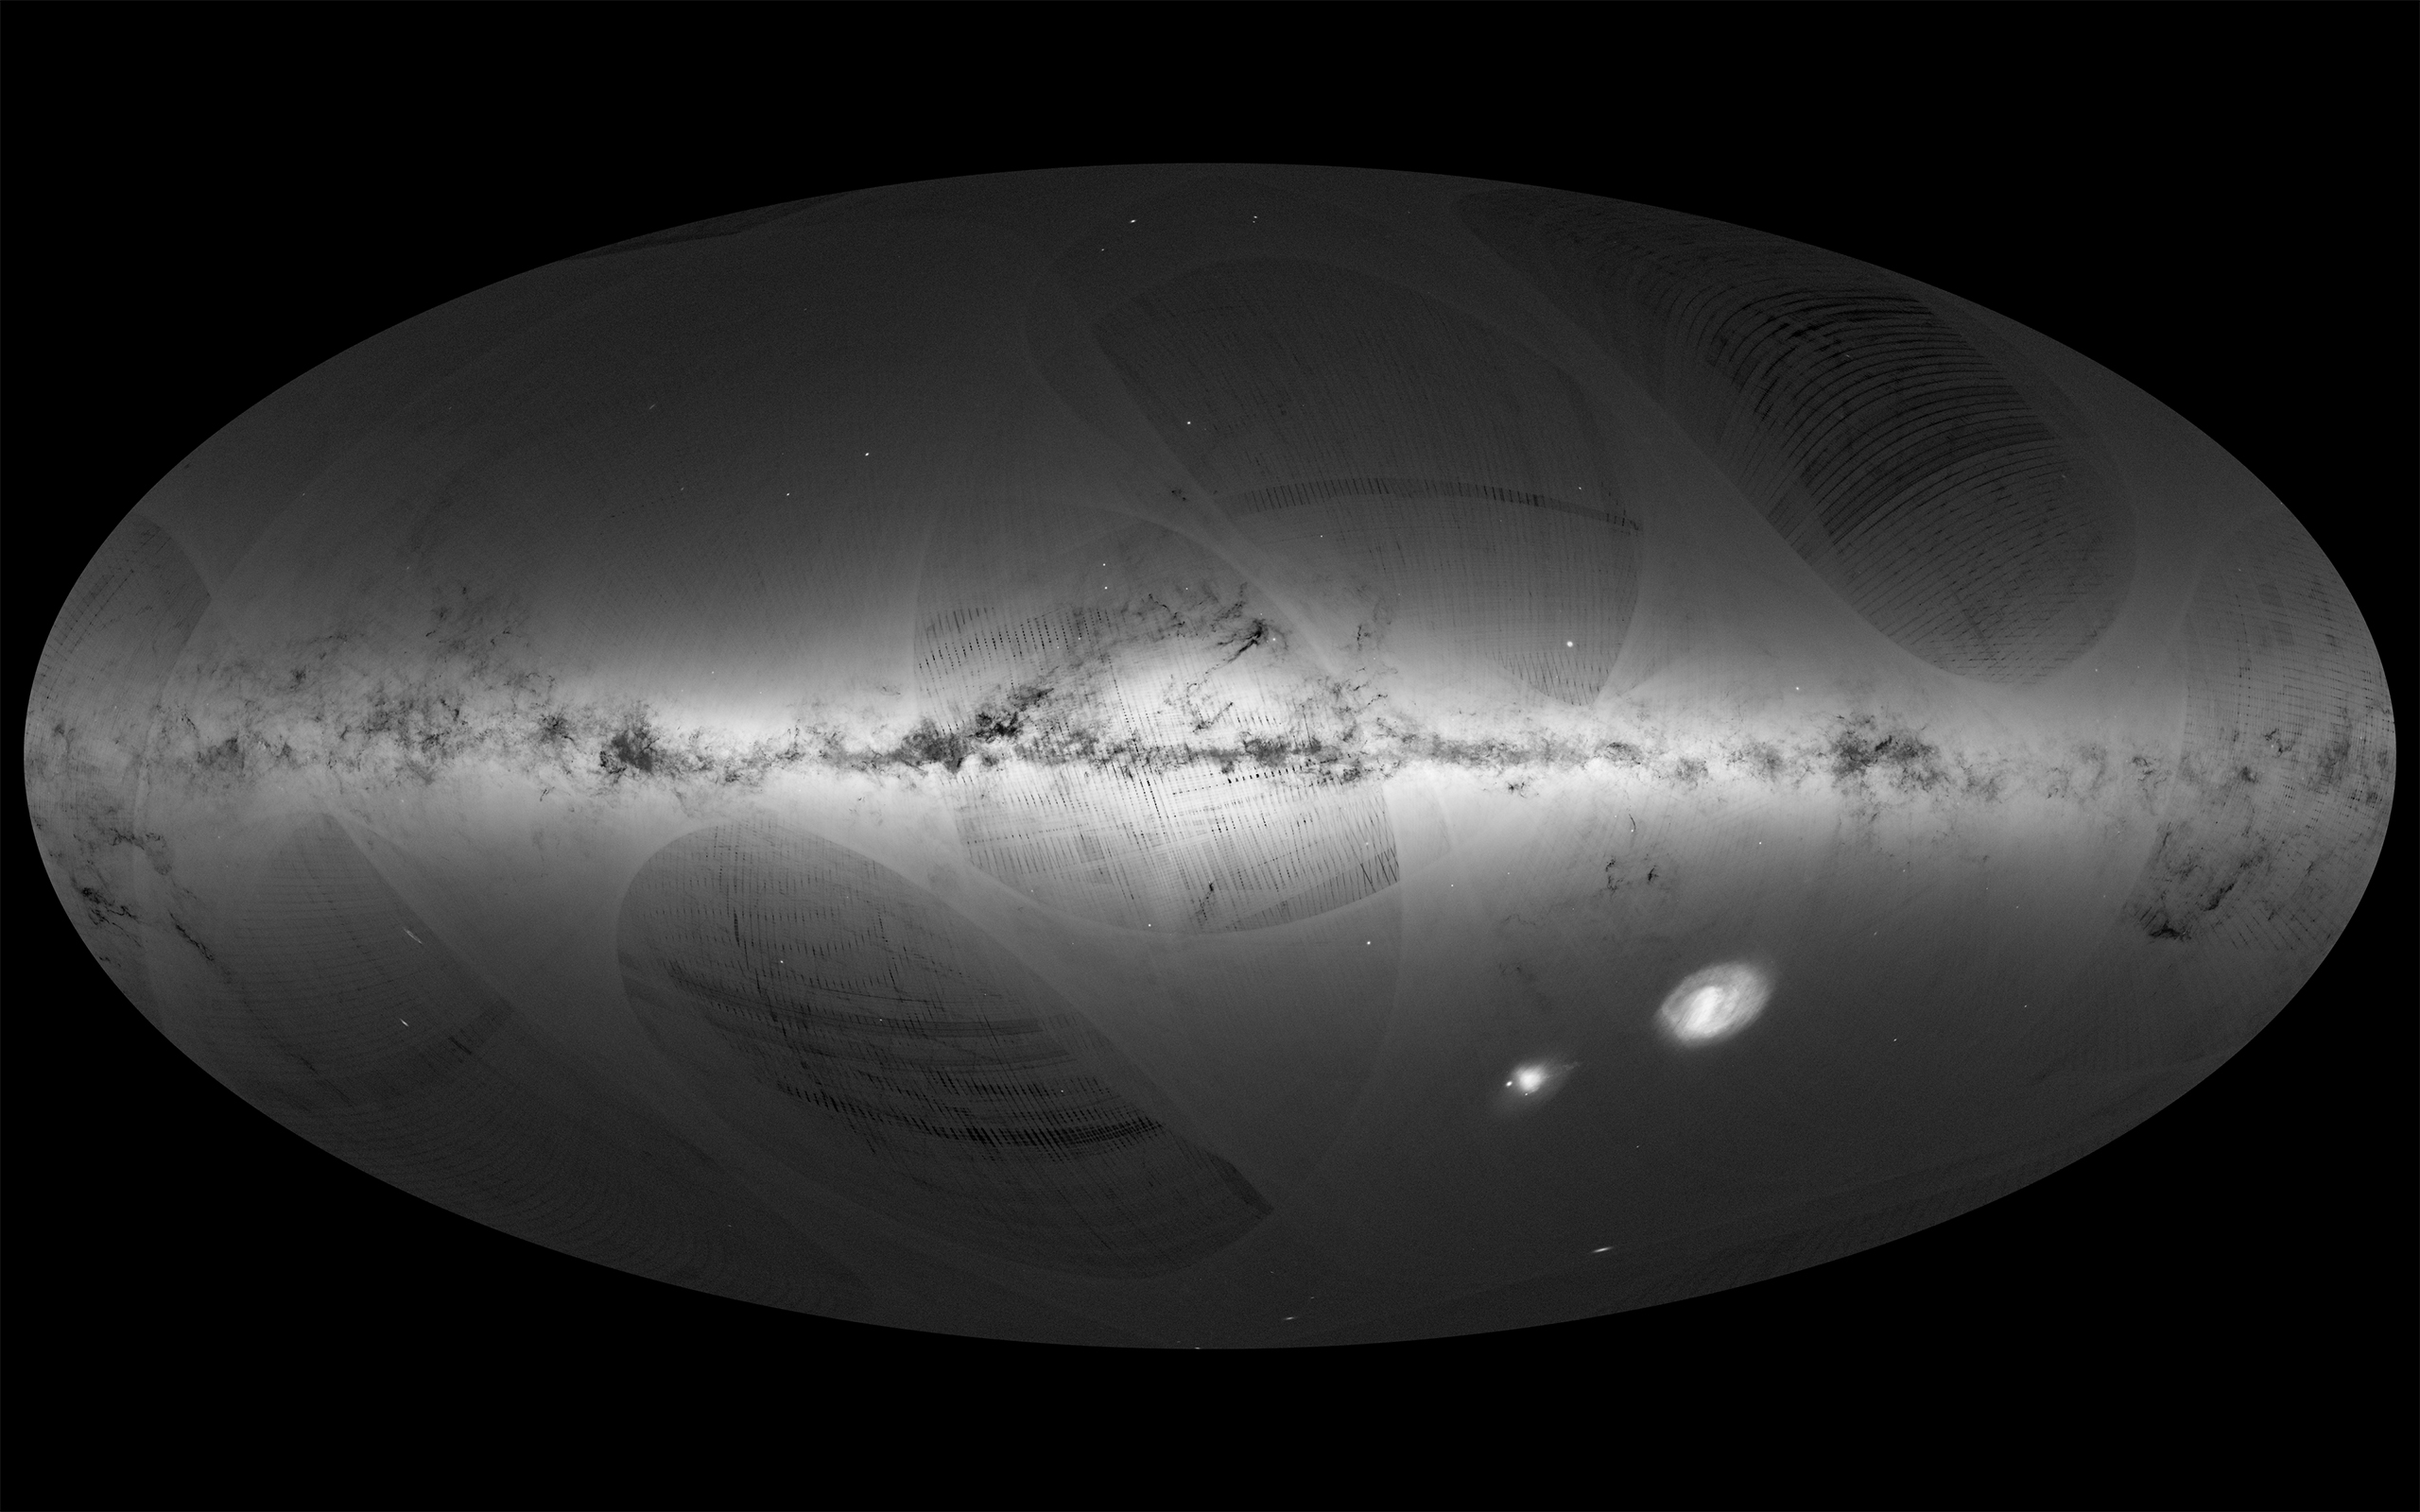 An all-sky view of stars in our Galaxy – the Milky Way – and neighboring galaxies, based on the first year of observations from ESA’s Gaia satellite, from July 2014 to Sept. 2015. (ESA/Gaia/DPAC)